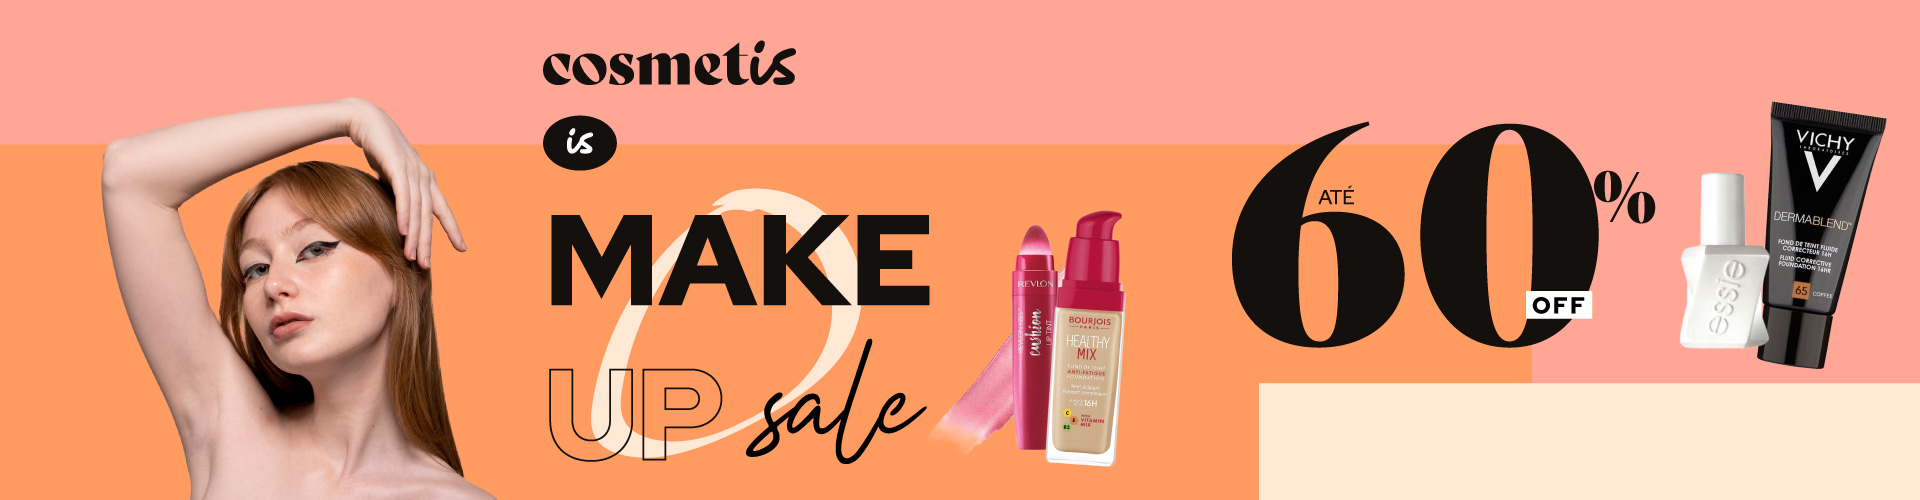 Cosmetis is Make Up Sale